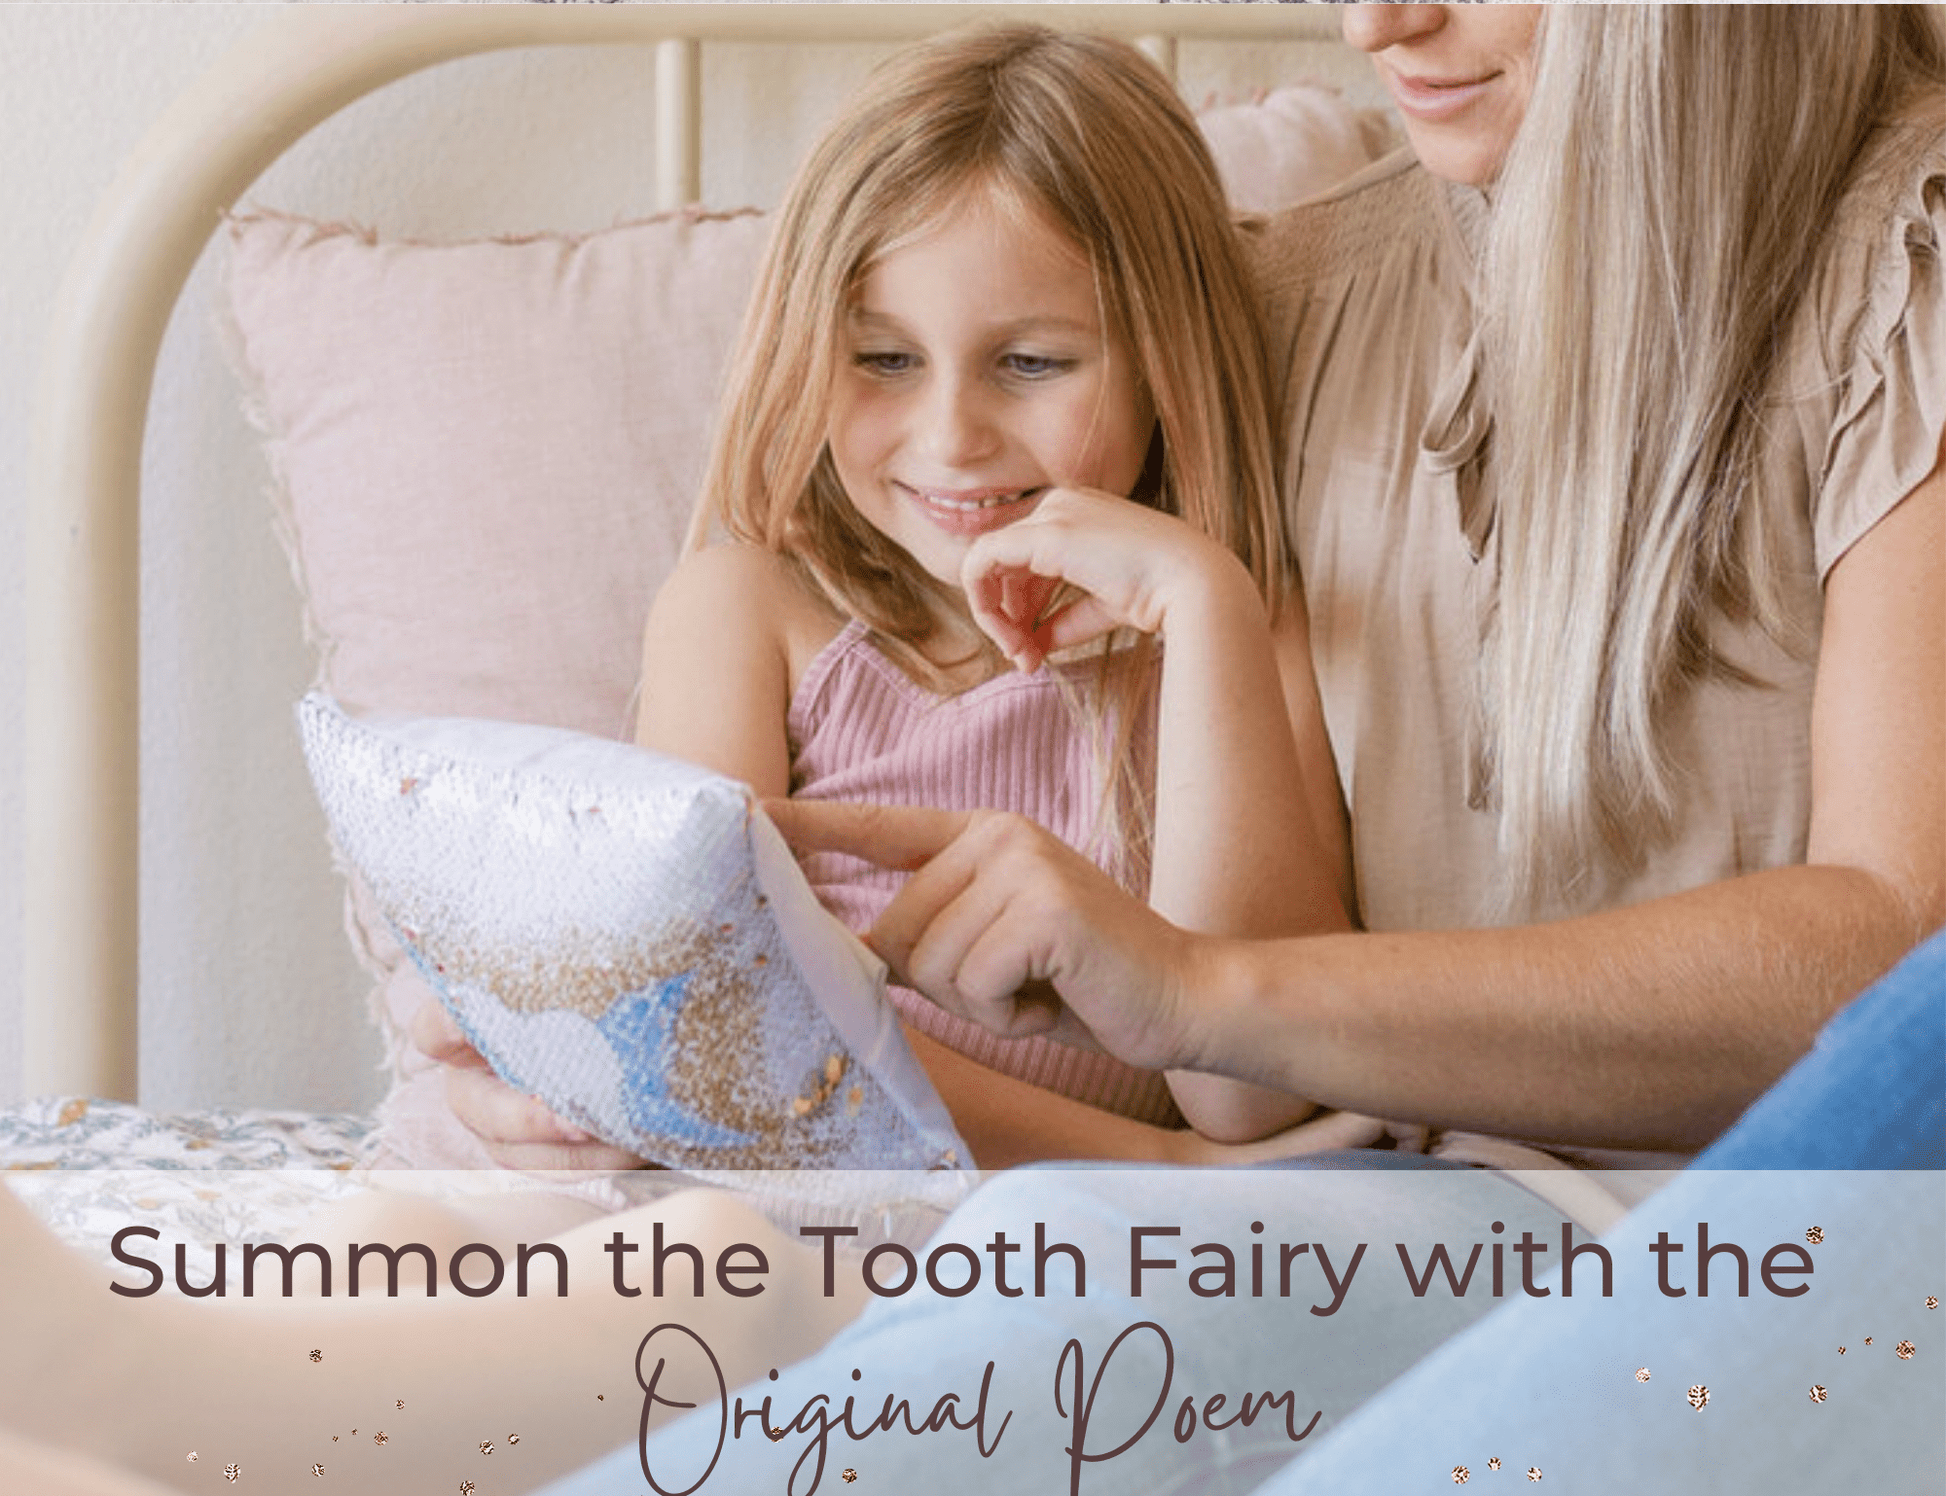 Tooth Fairy Pillow - 20MomentsofTooth